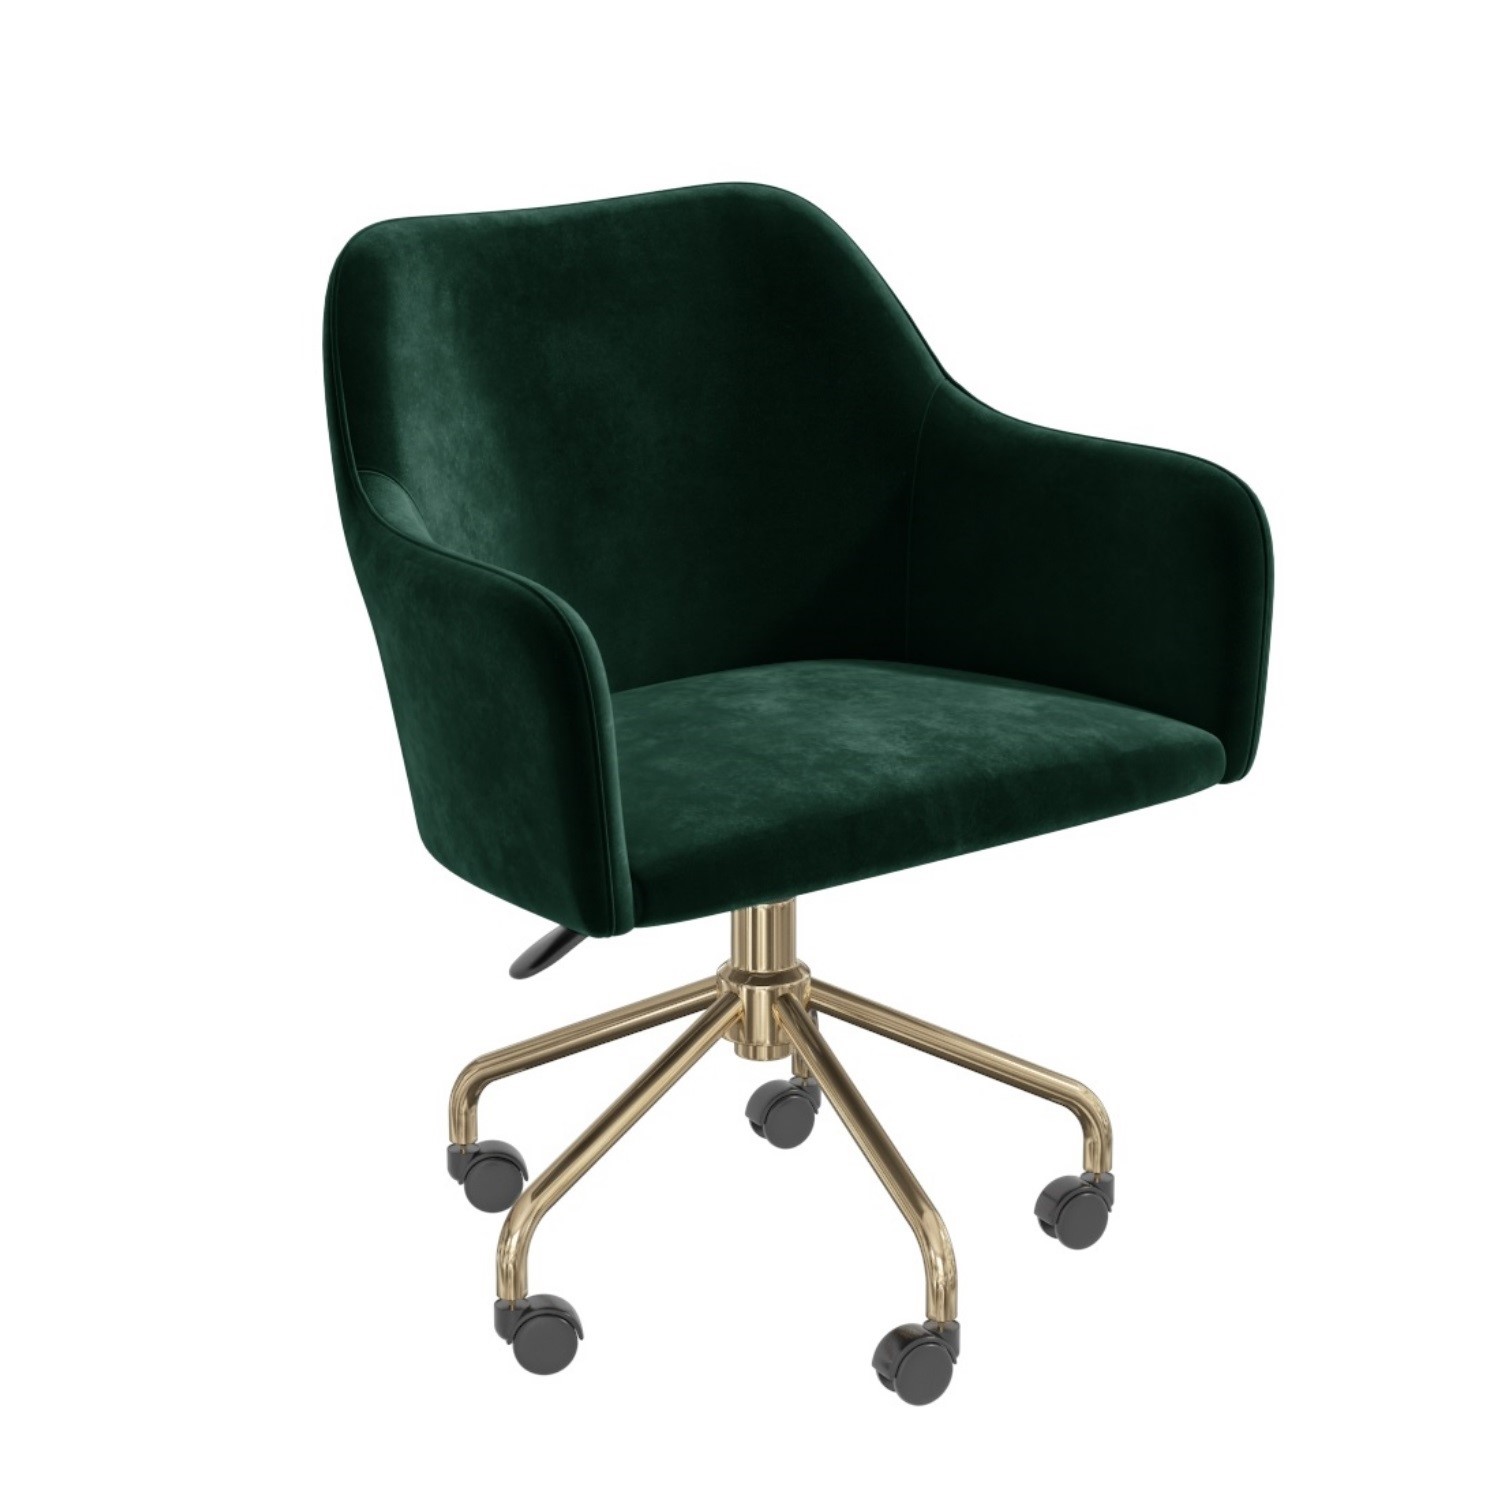 Green Velvet Office Swivel Chair With Gold Base Marley Furniture123